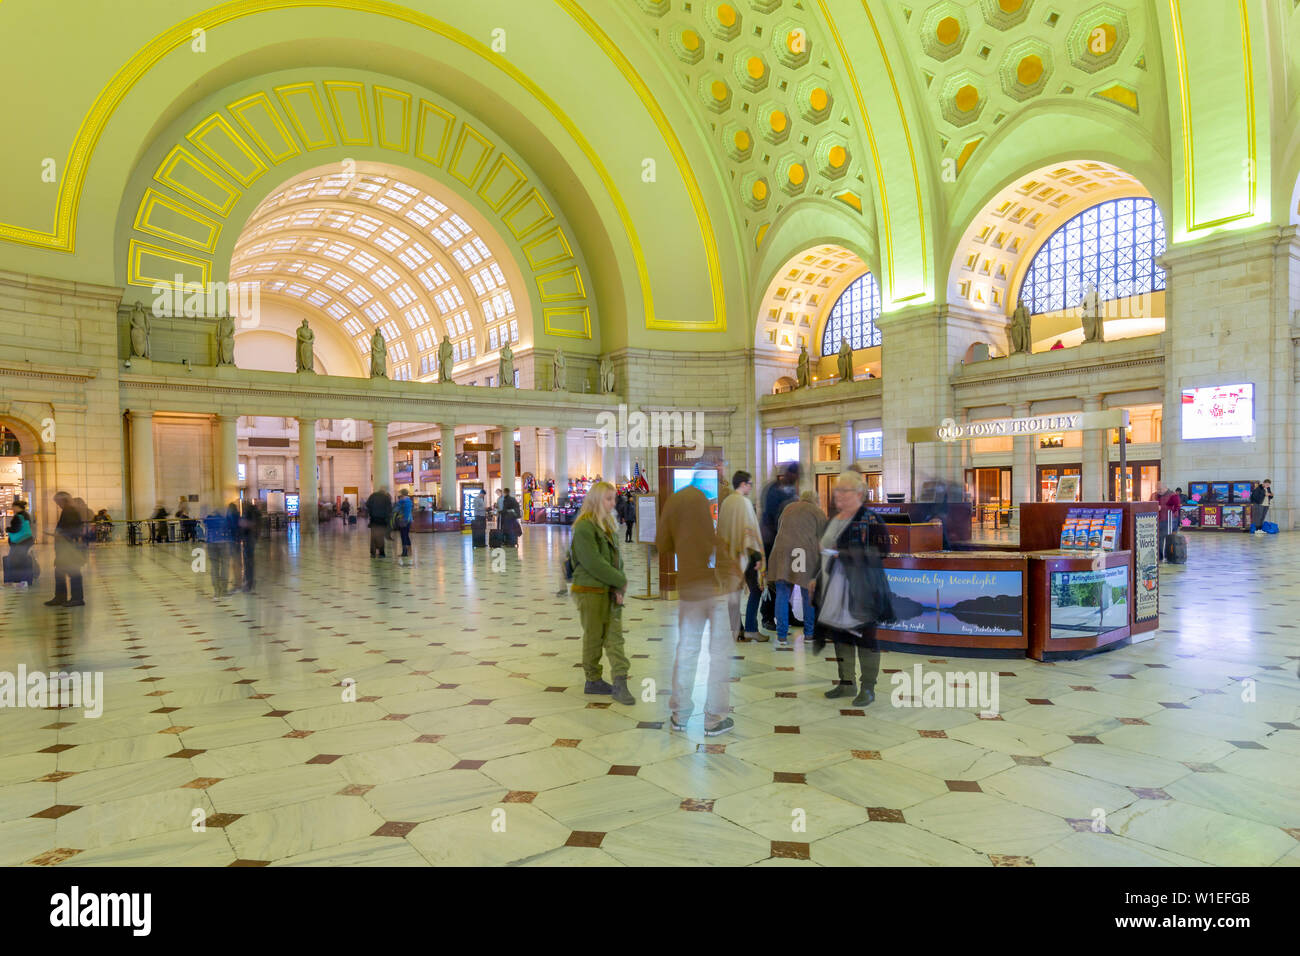 View of the interior of Union Station, Washington D.C., United States of America, North America Stock Photo